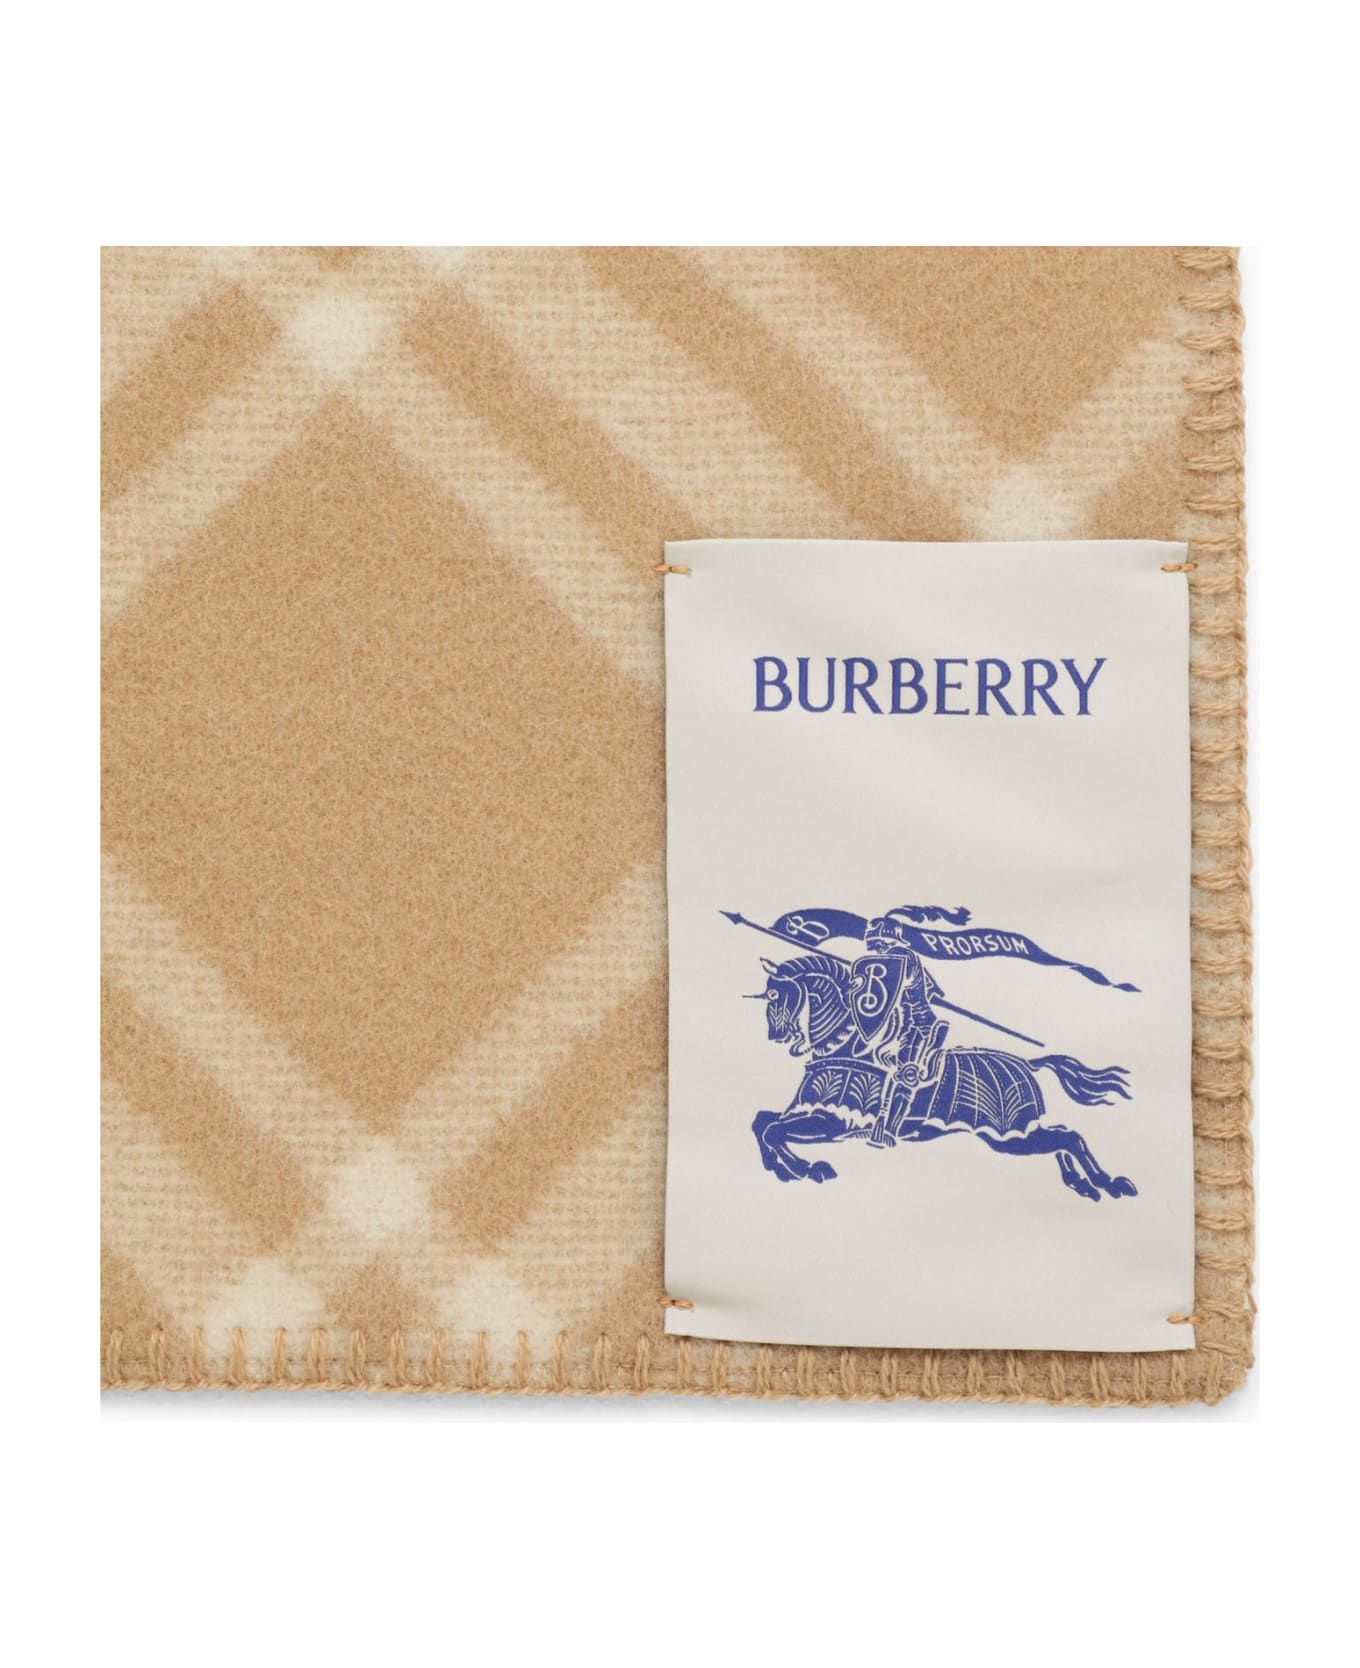 Burberry Archive Beige Wool Scarf With Vintage Check Pattern - Beige